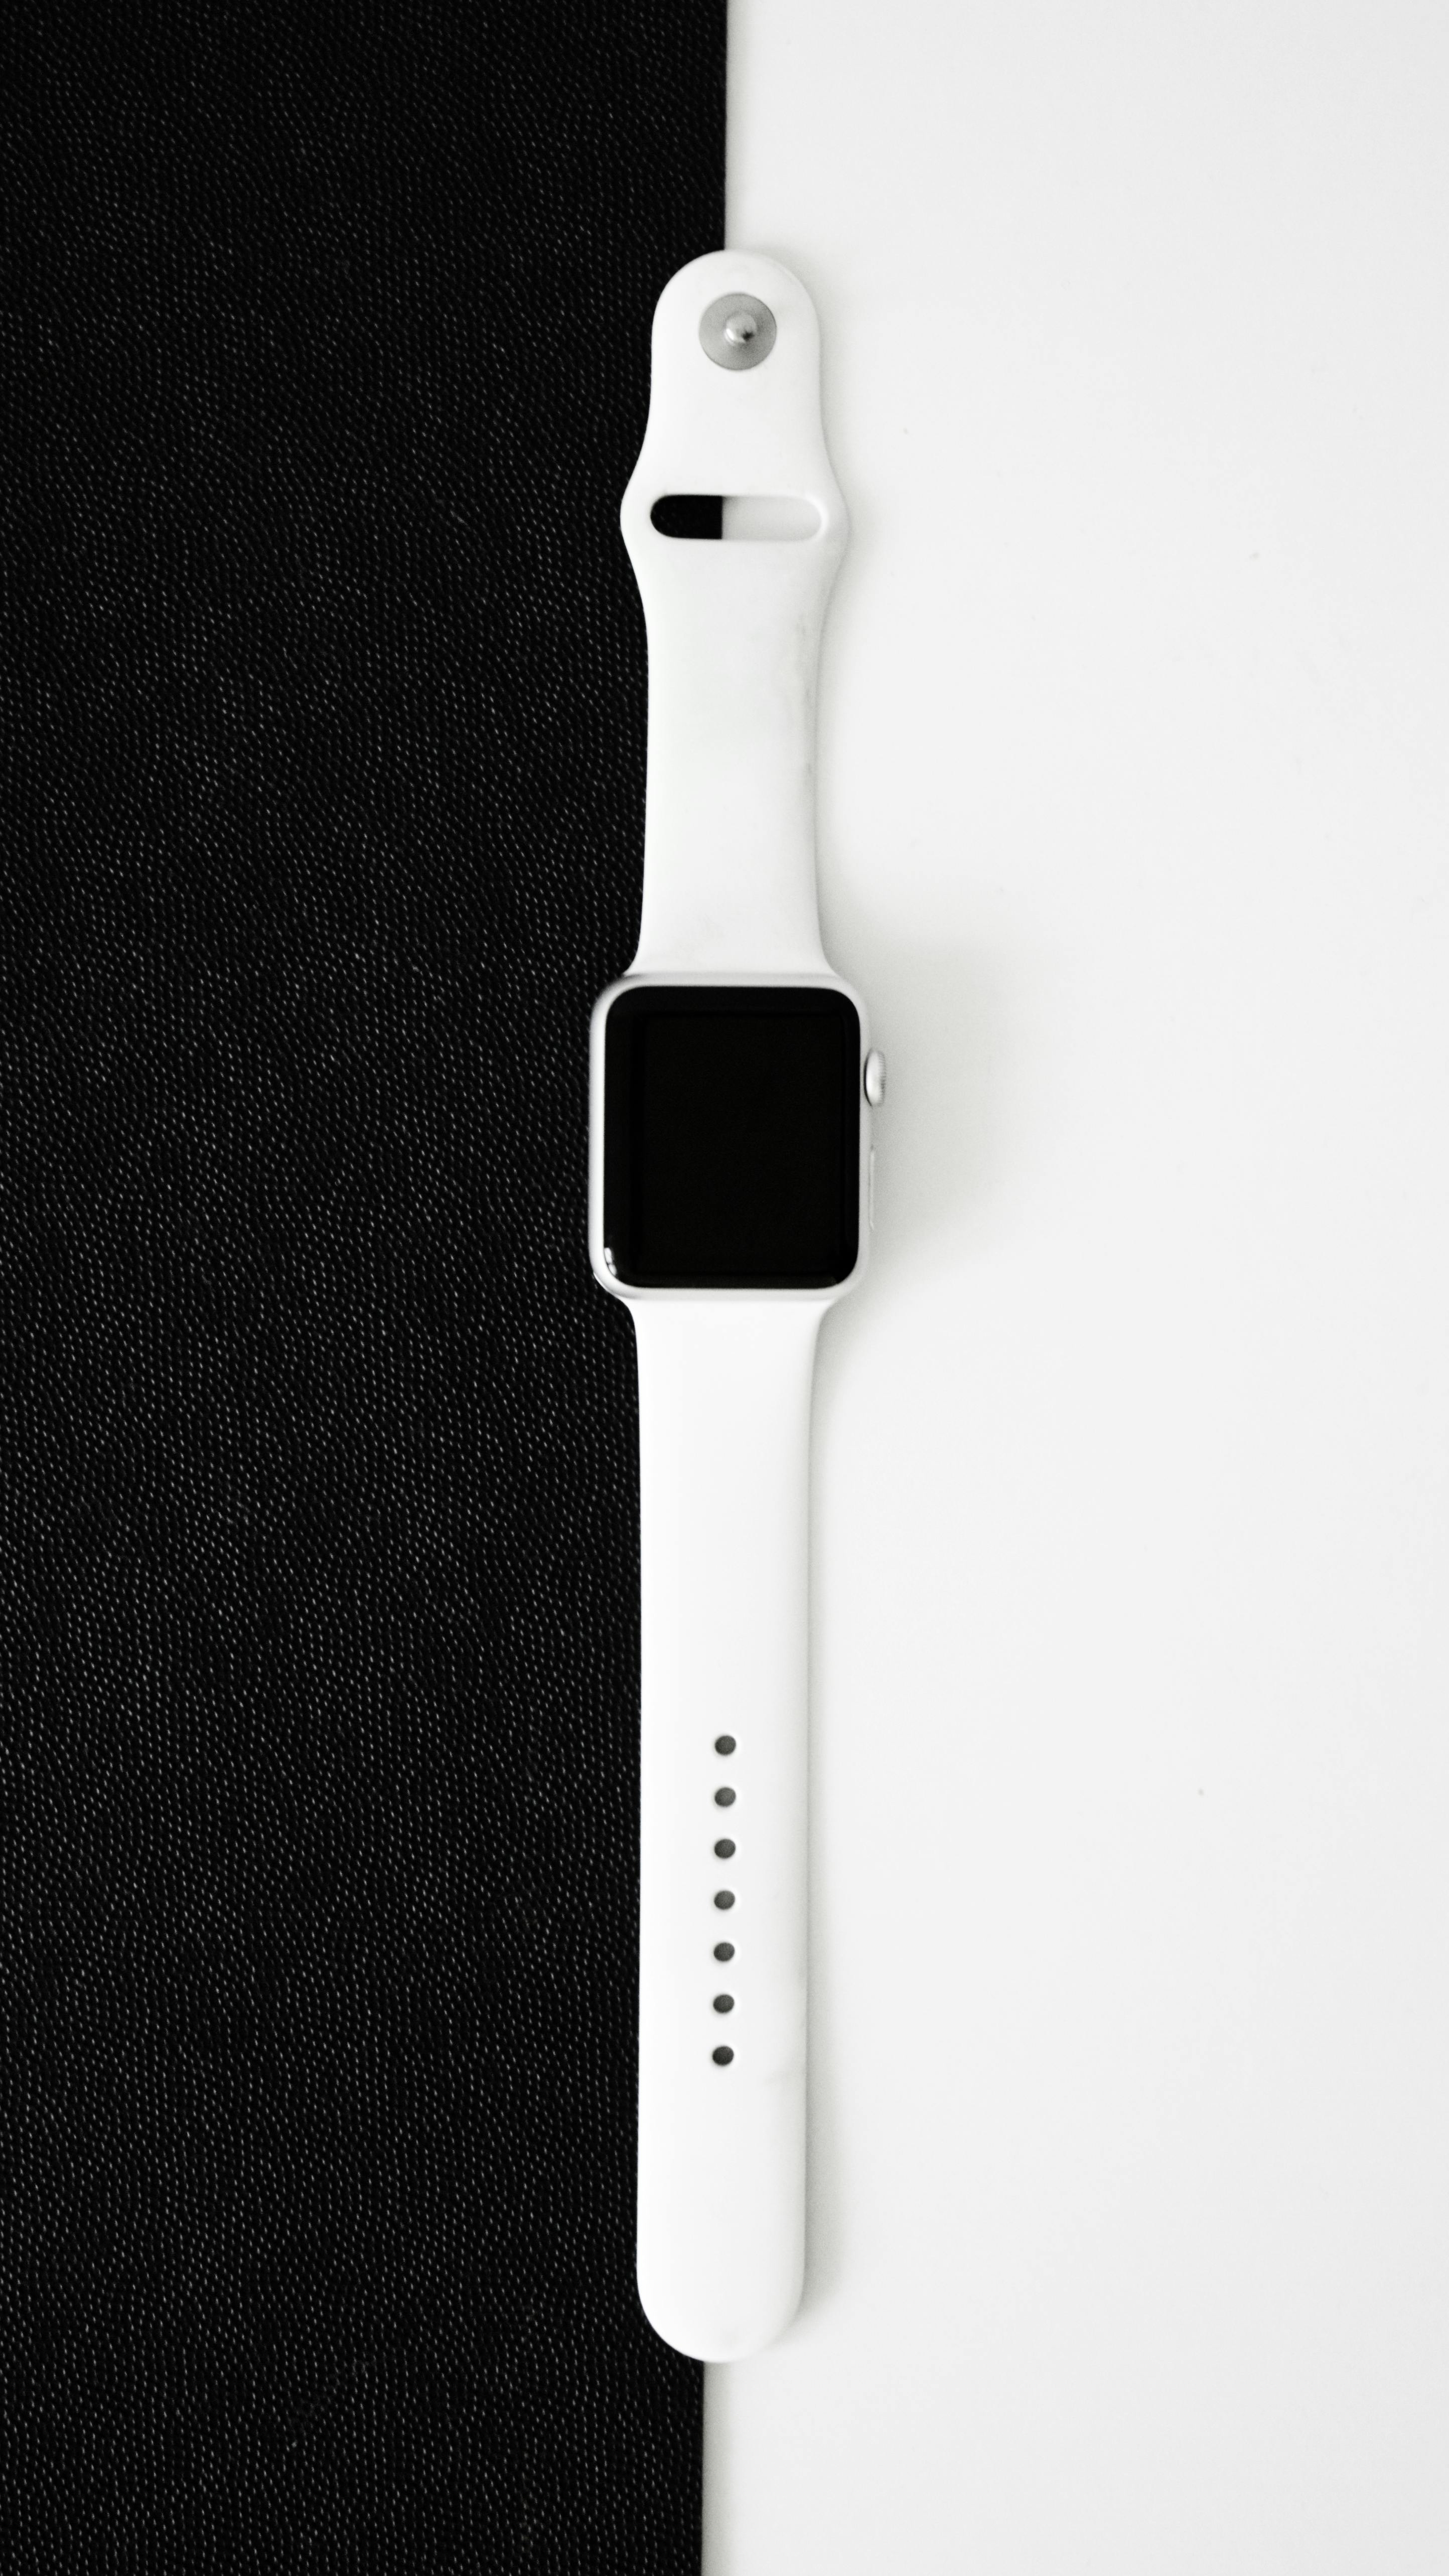 Apple Watch Series 5 Photos, Download The BEST Free Apple Watch Series 5  Stock Photos & HD Images